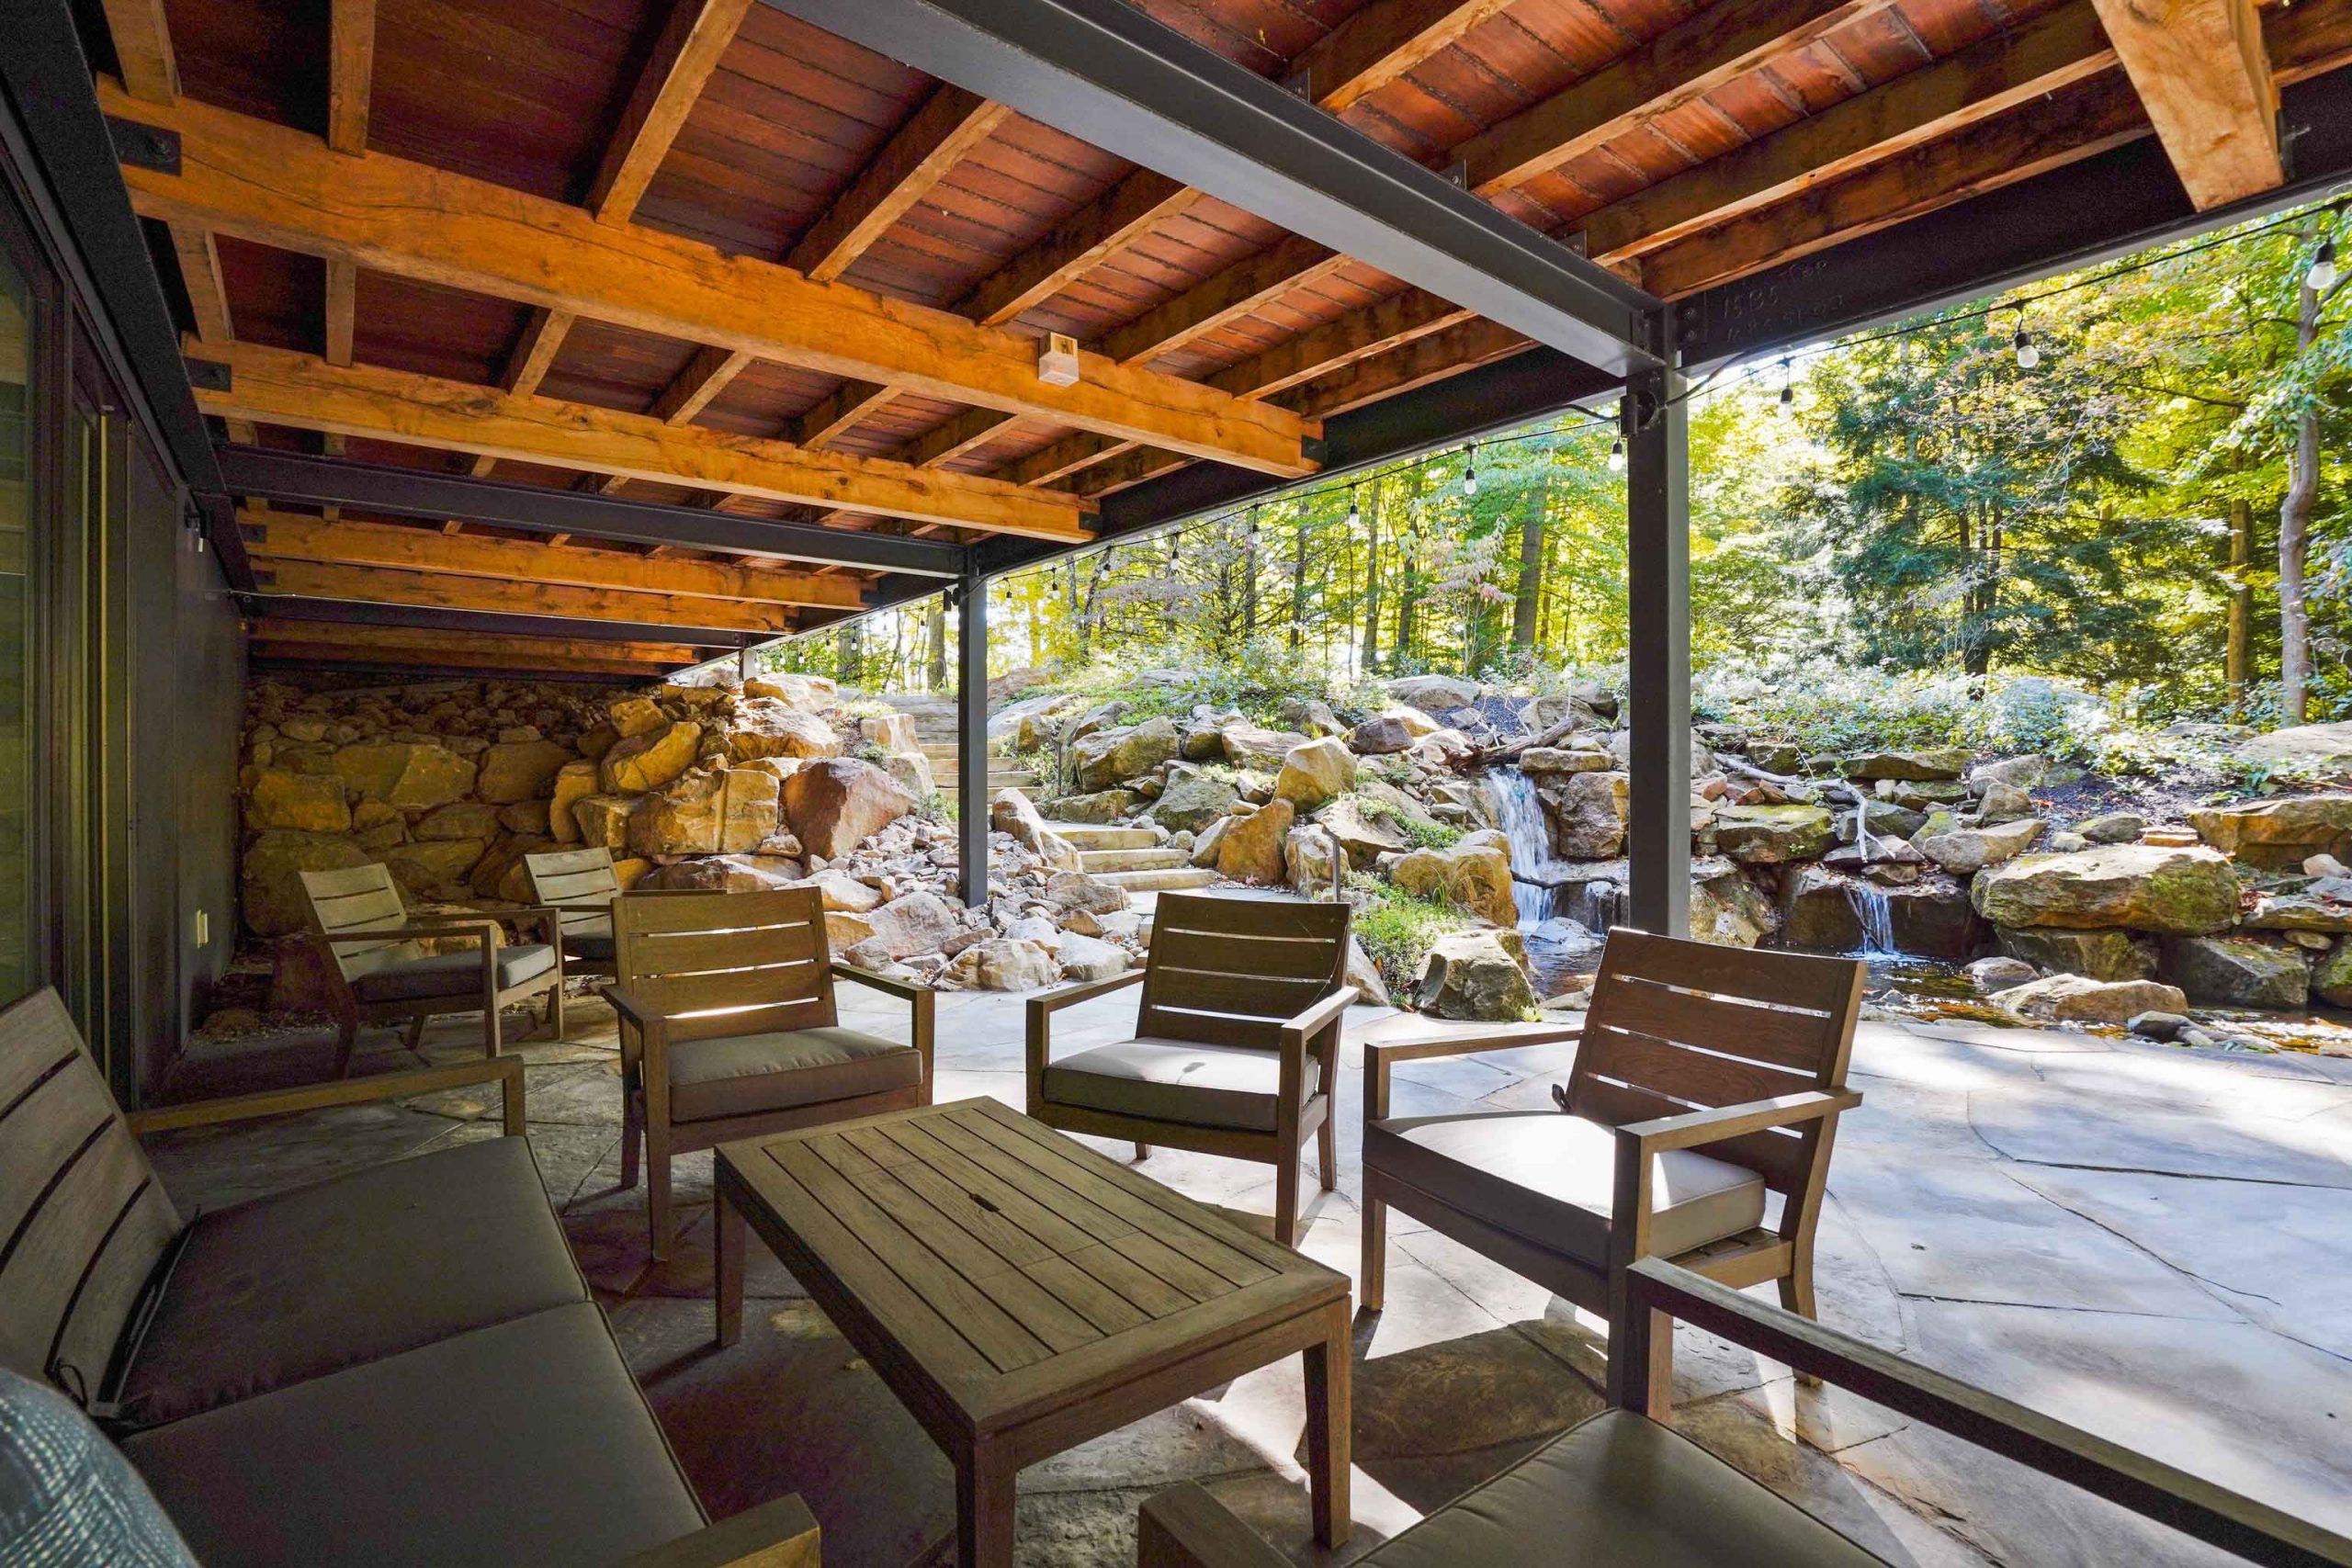 Lounge area under patio overlooking pondless waterfall and colorful tall trees.